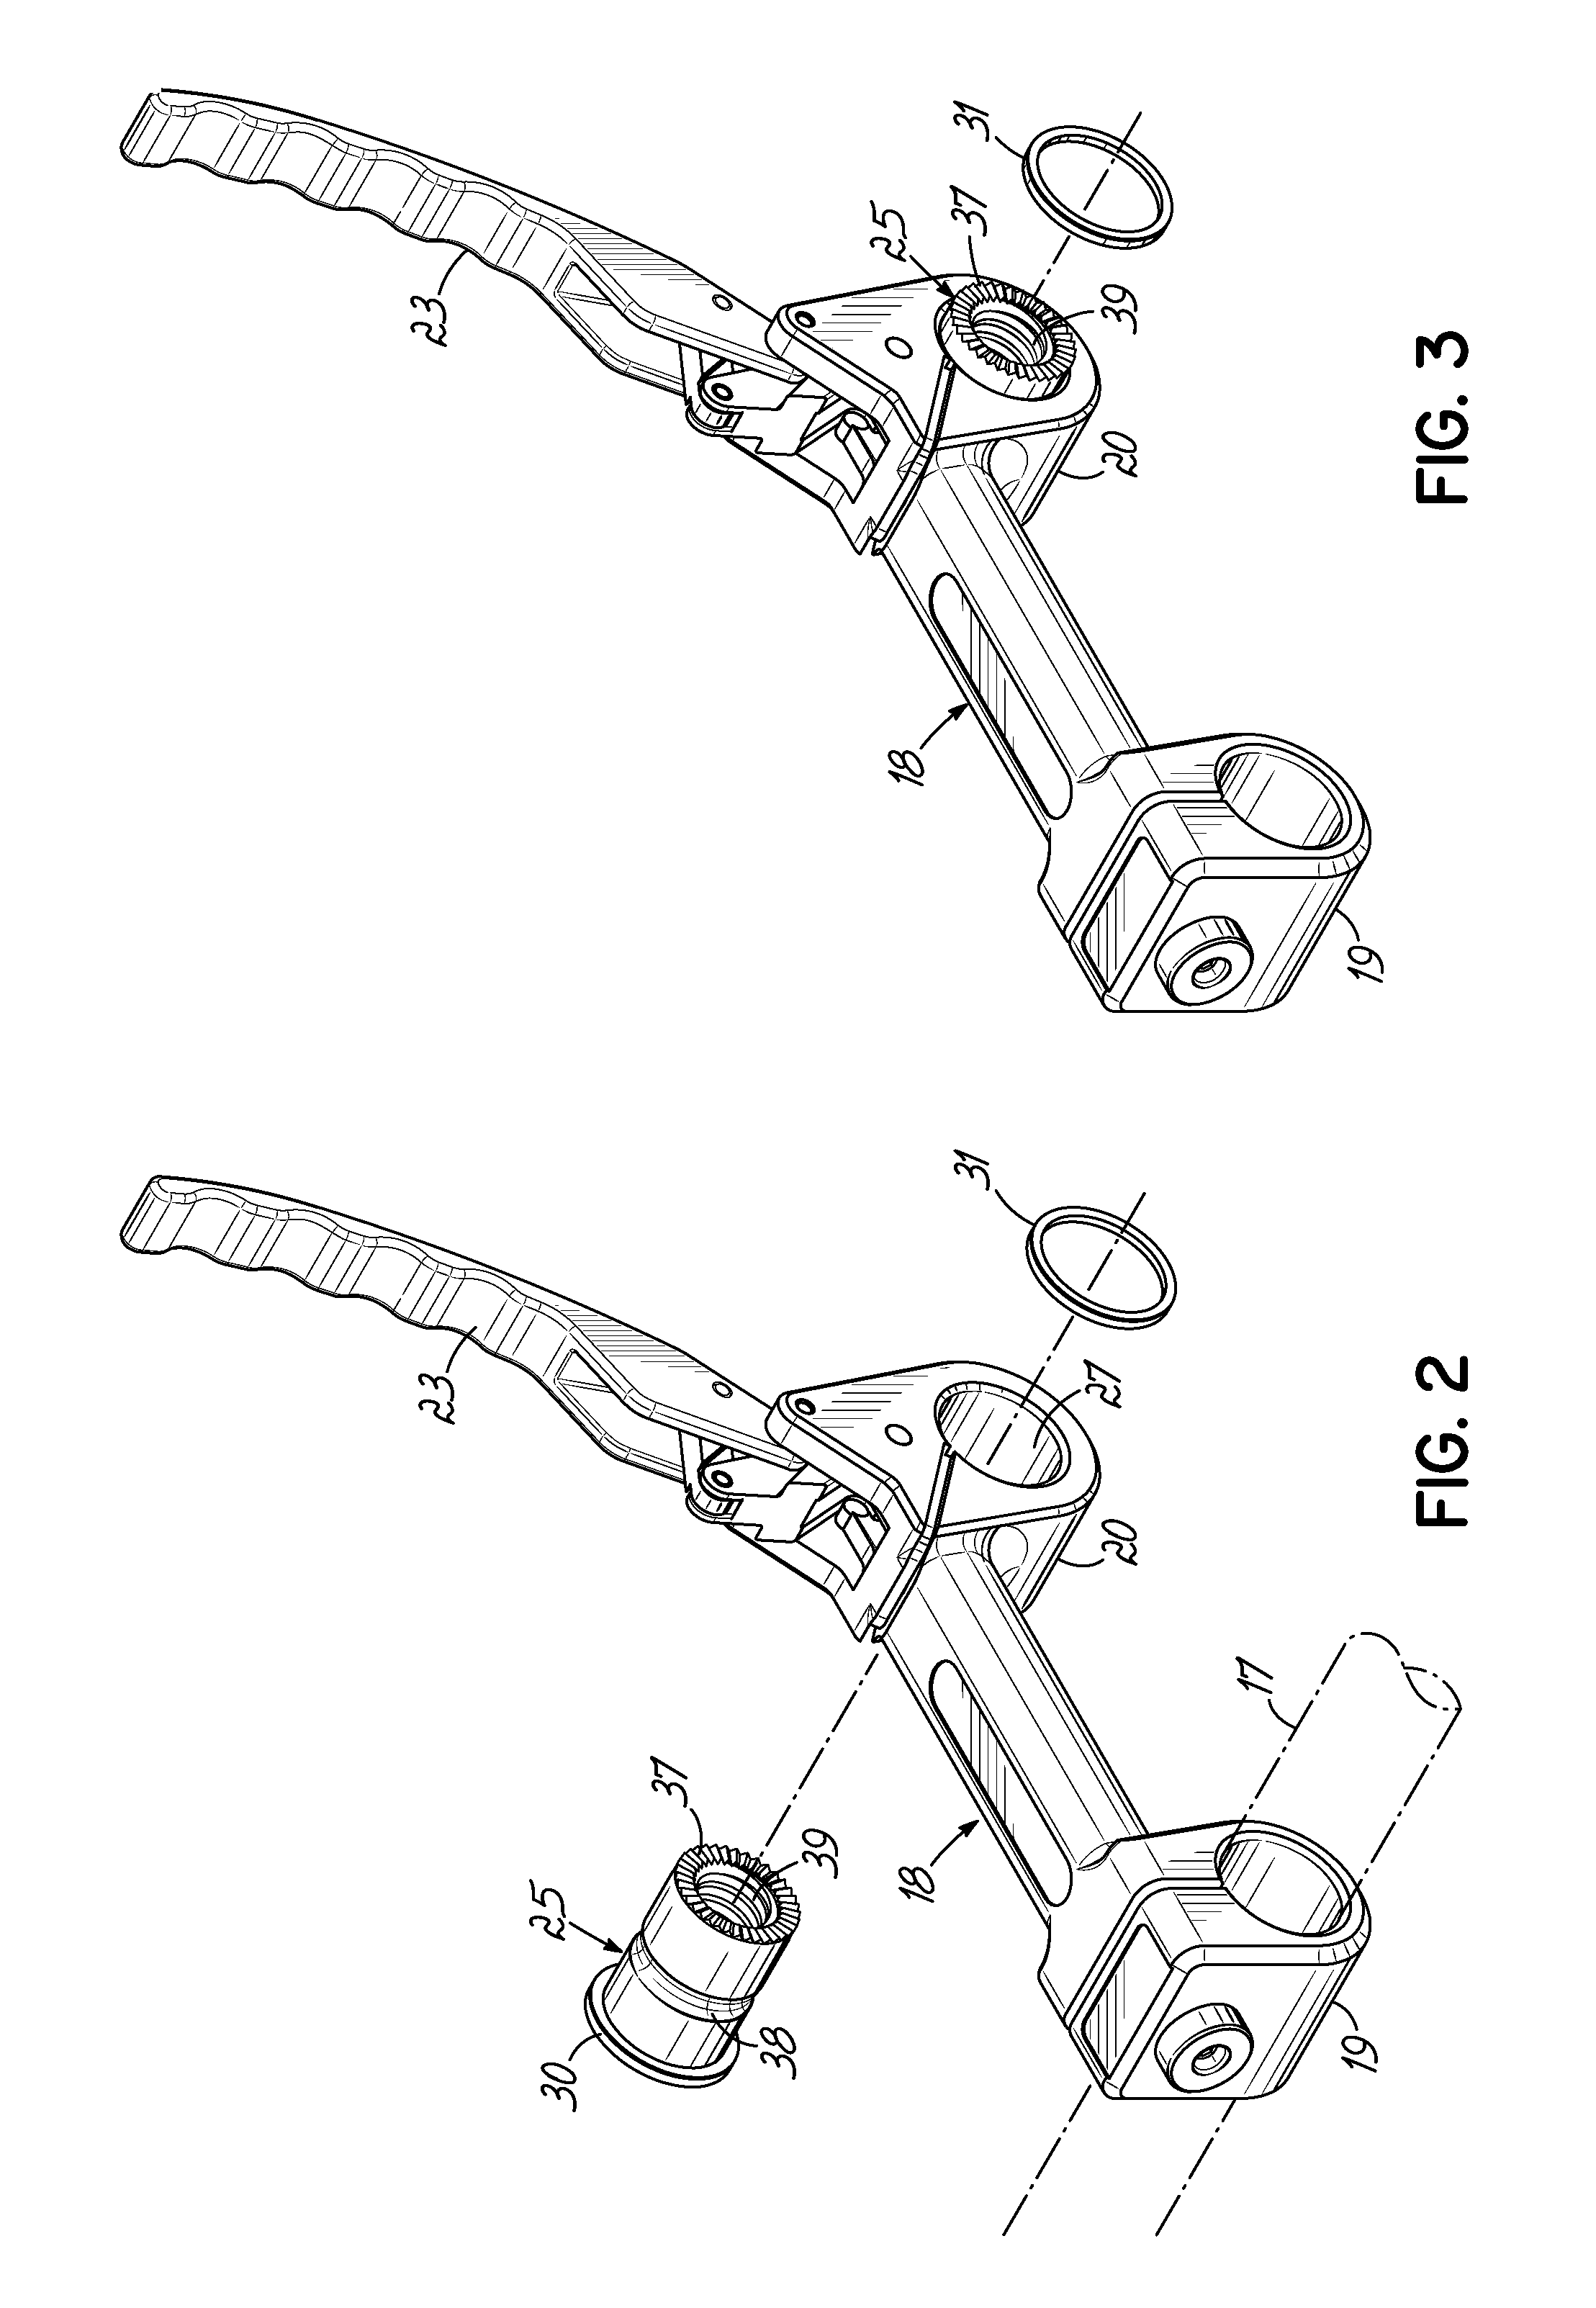 Durable connector for base unit handle of a patient head support system